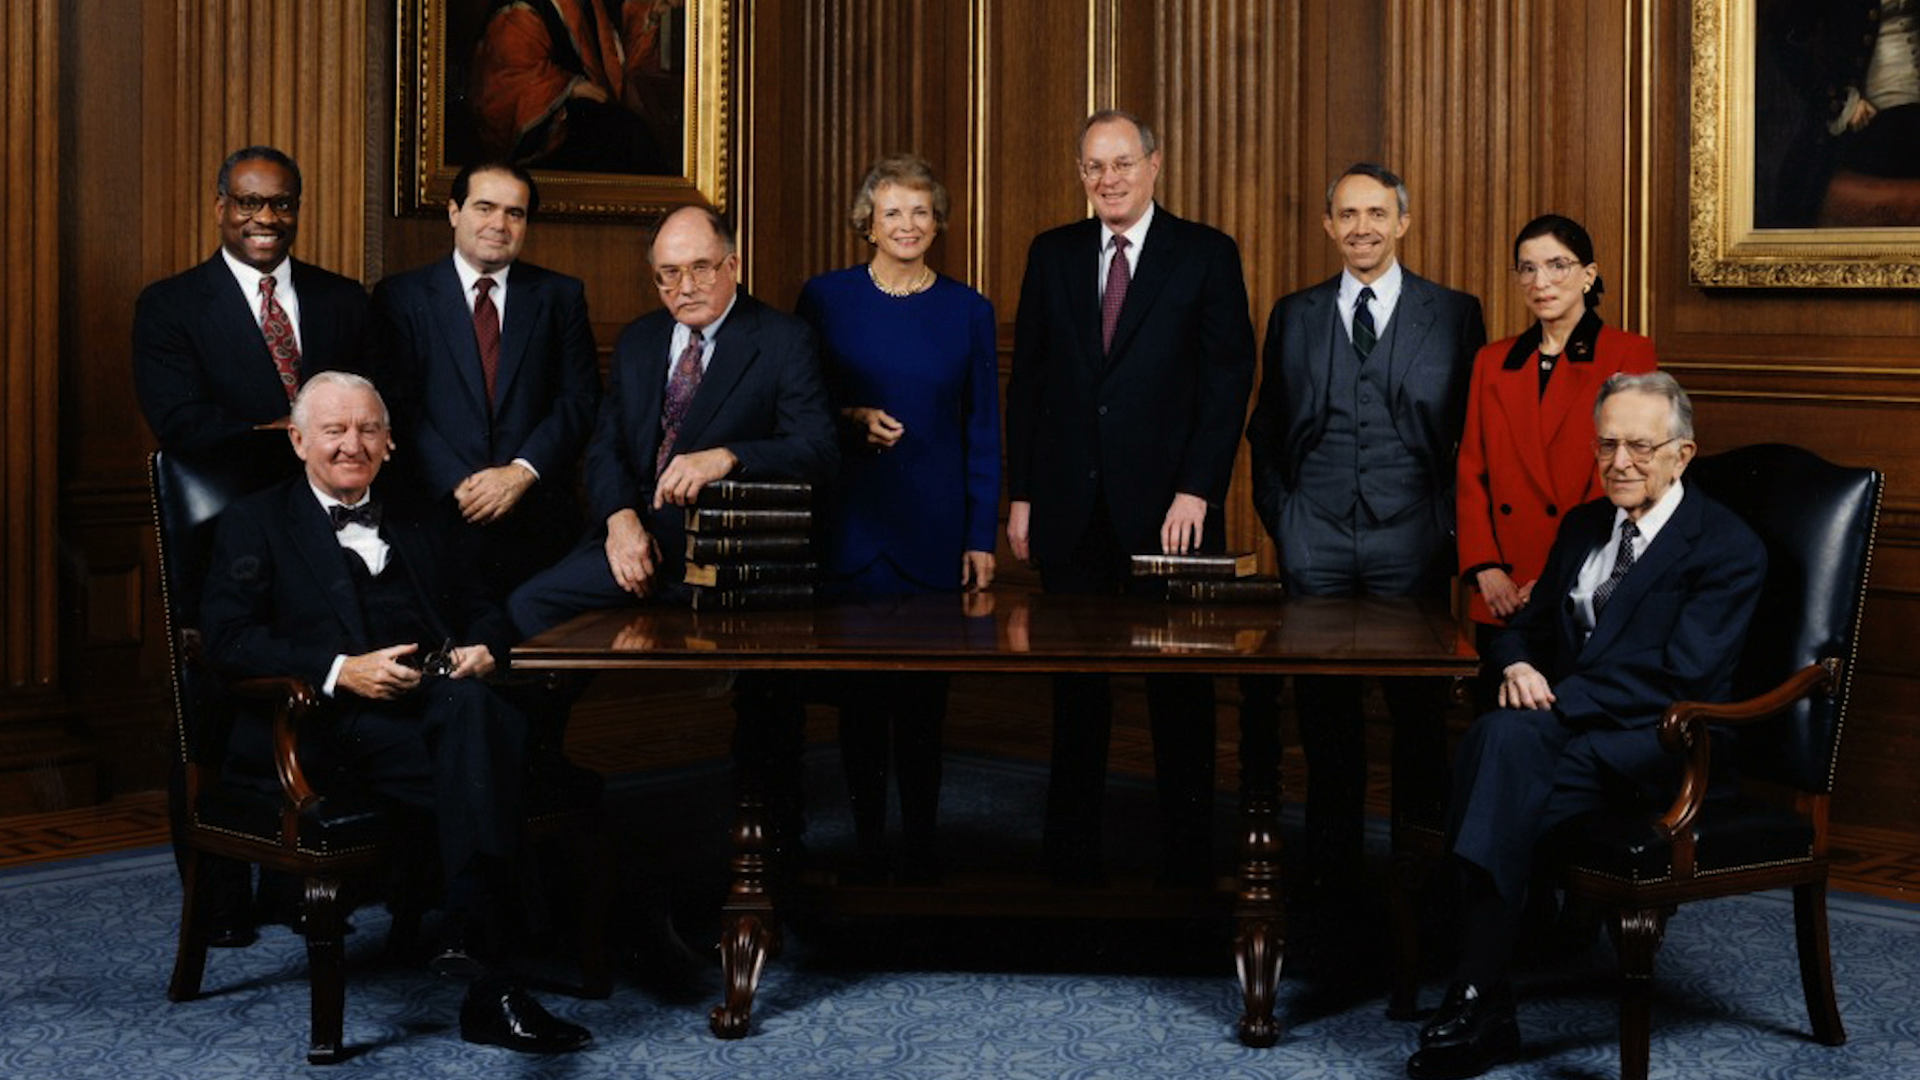 1993 Supreme Court Justices